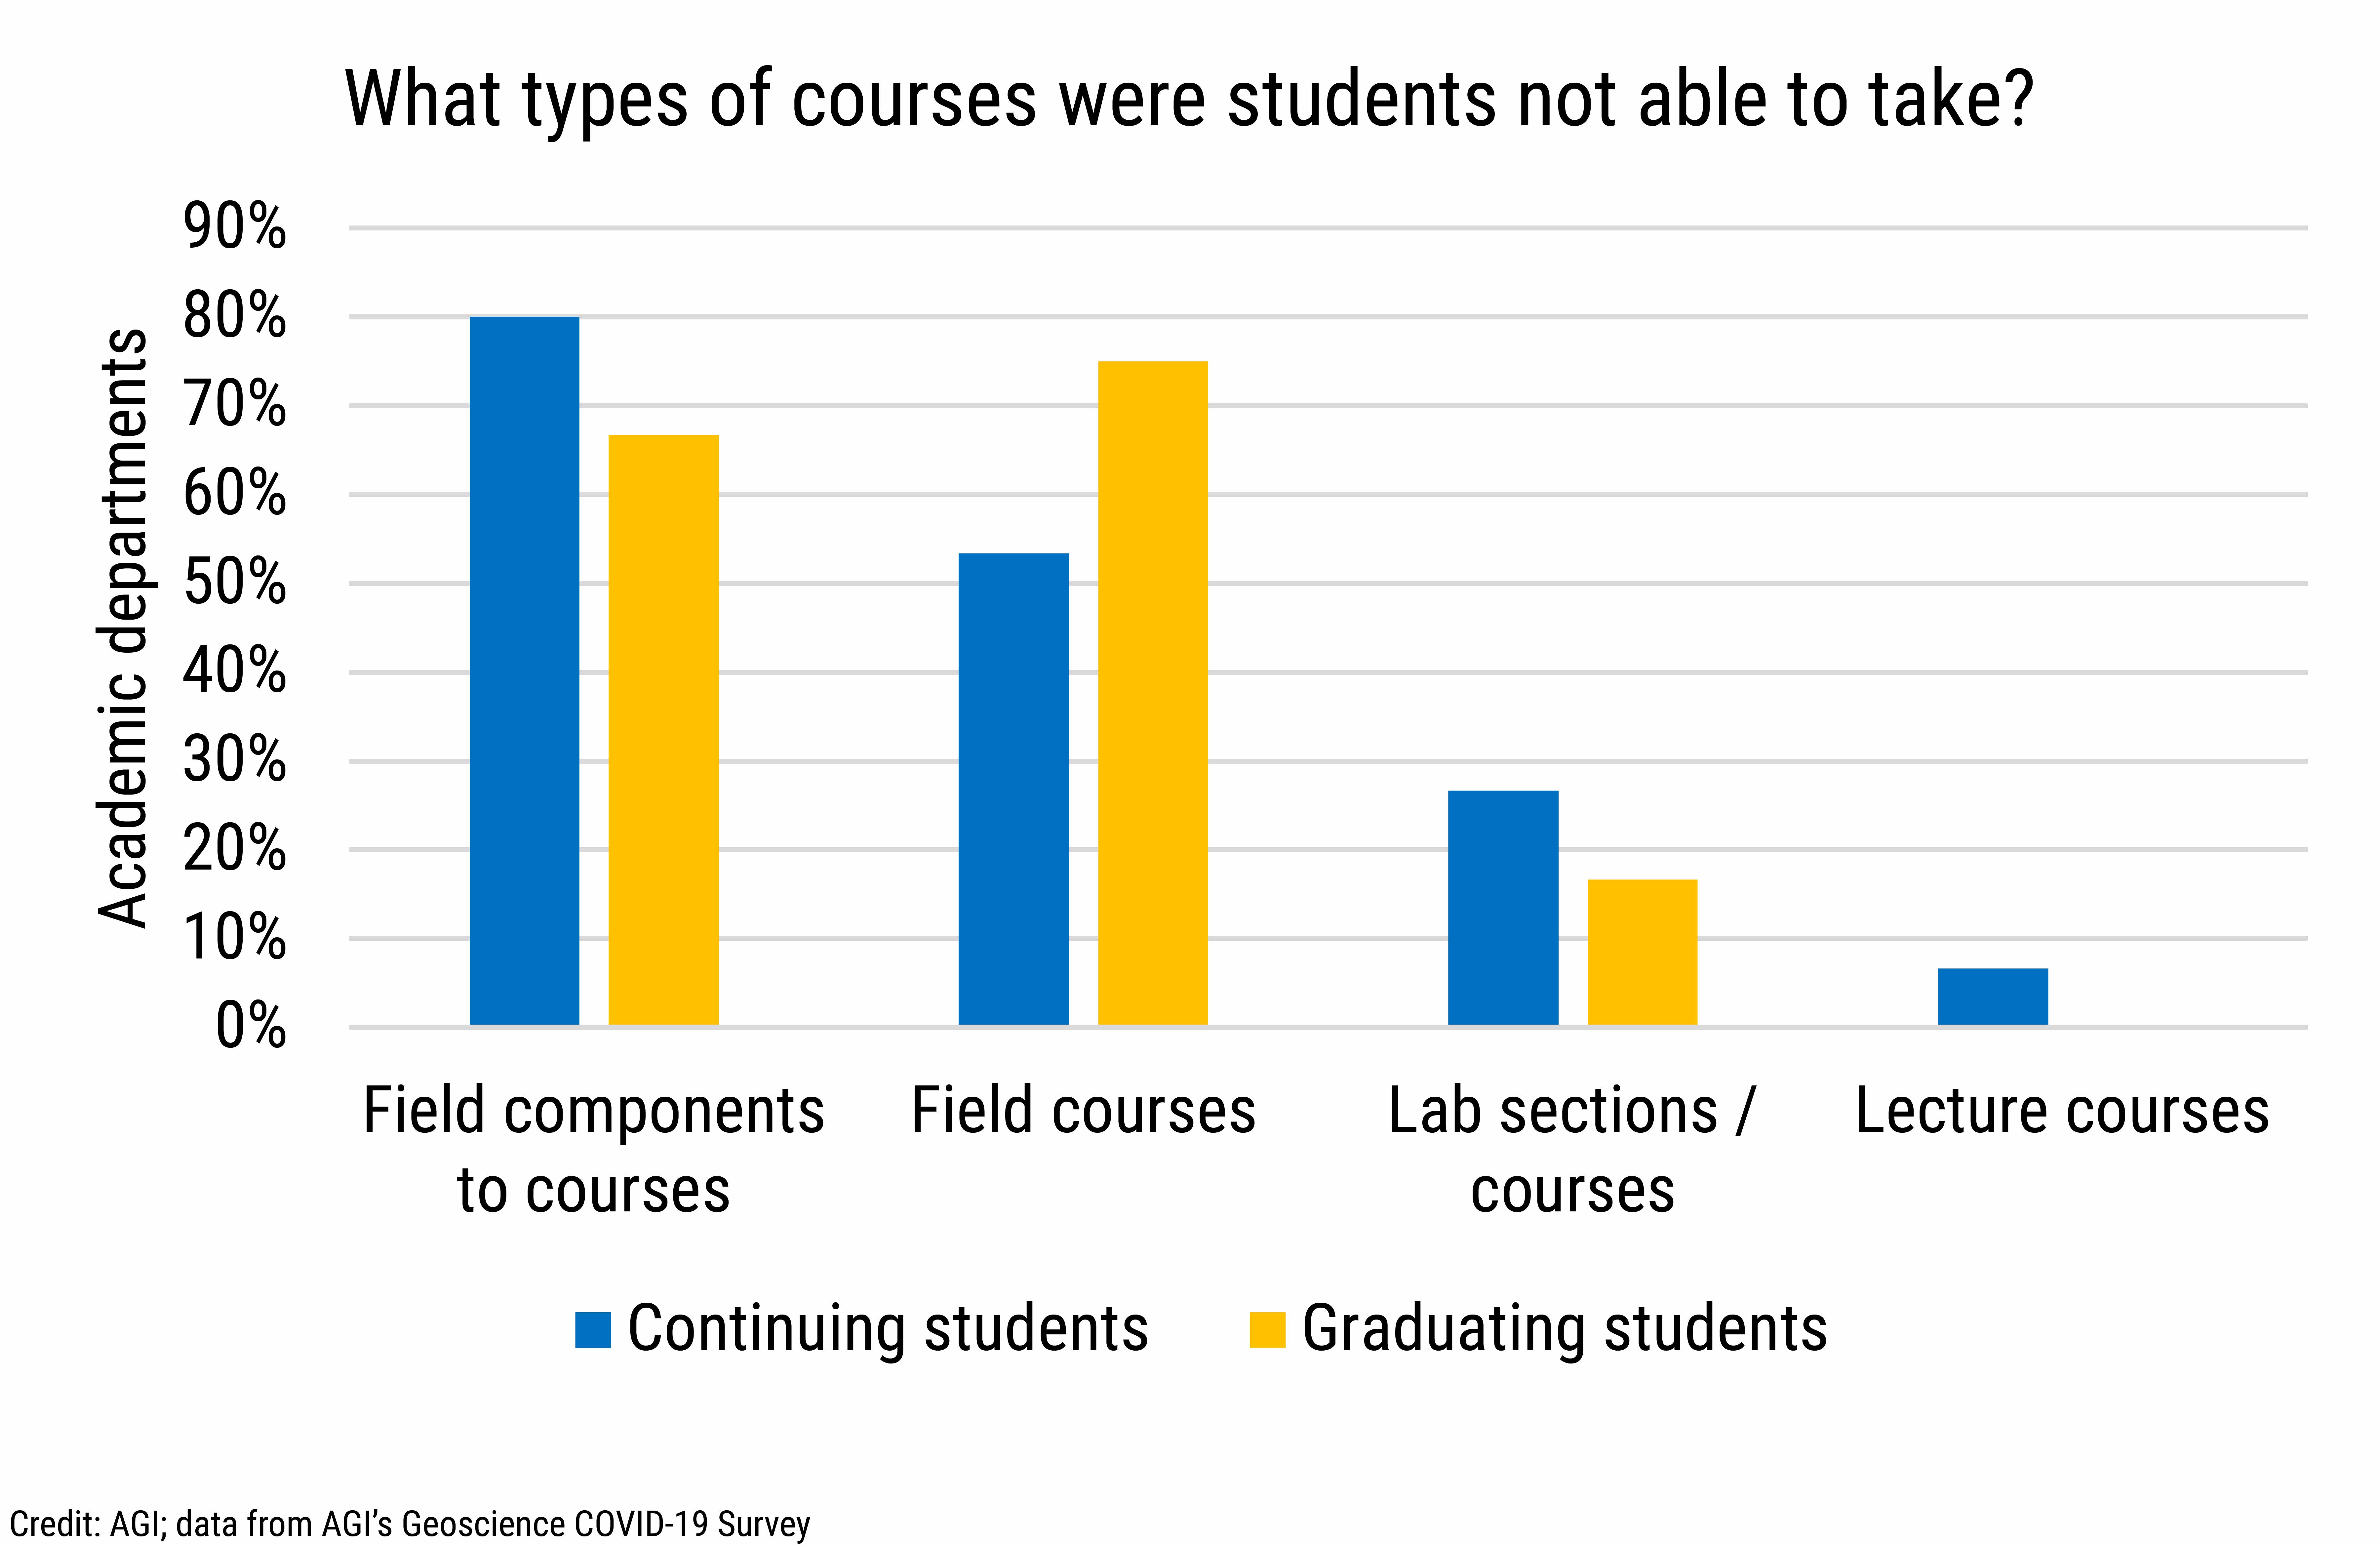 DB_2021-032 chart 04: What types of courses were students unable to take? (Credit: AGI; data from AGI's Geoscience COVID-19 Survey)